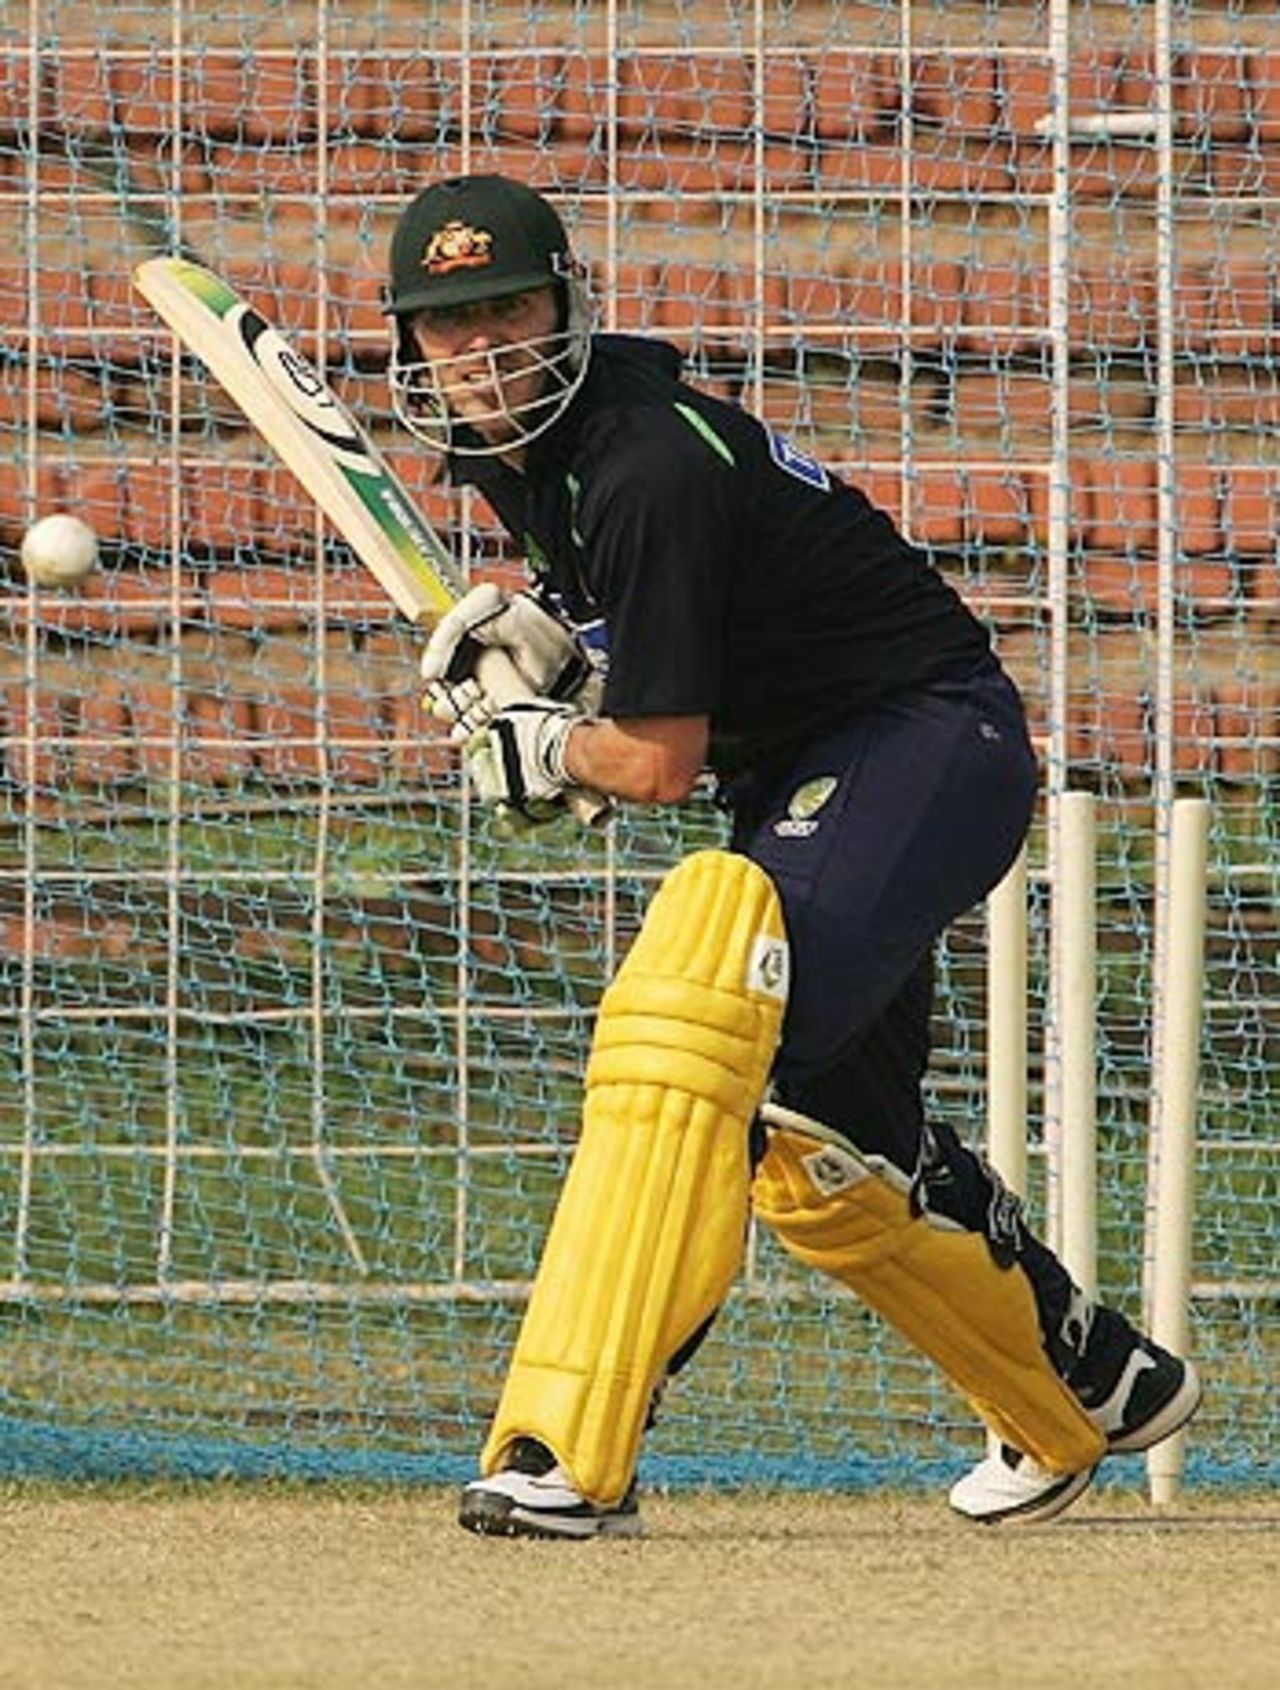 Damien Martyn shapes to play during a net session, Chandigarh Cricket Club, Chandigarh, October 26, 2006